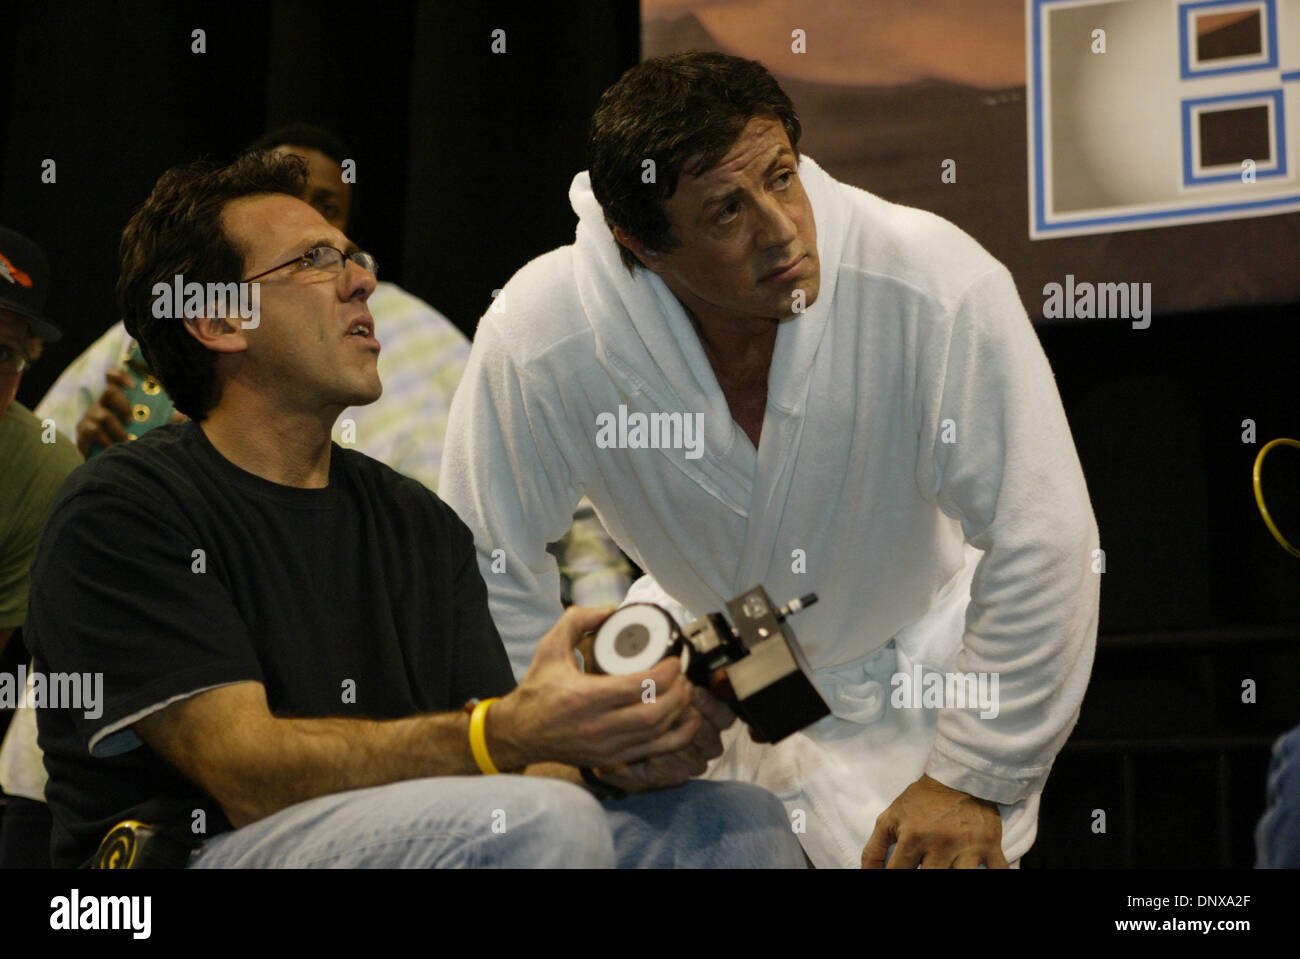 Dec 02, 2005; Las Vegas, NV, USA; Actor/director SYLVESTER STALLONE who is directing and starring in his new movie 'Rocky 6' discussing the 'Rocky 6' film set with a cameraman. Tarver portrays Stallone's opponent Mason Dixon. Stallone and Tarver had a mock weigh-in for the movie at the Mandalay Bay Hotel & Casino. Mandatory Credit: Photo by Mary Ann Owen/ZUMA Press. (©) Copyright 2 Stock Photo